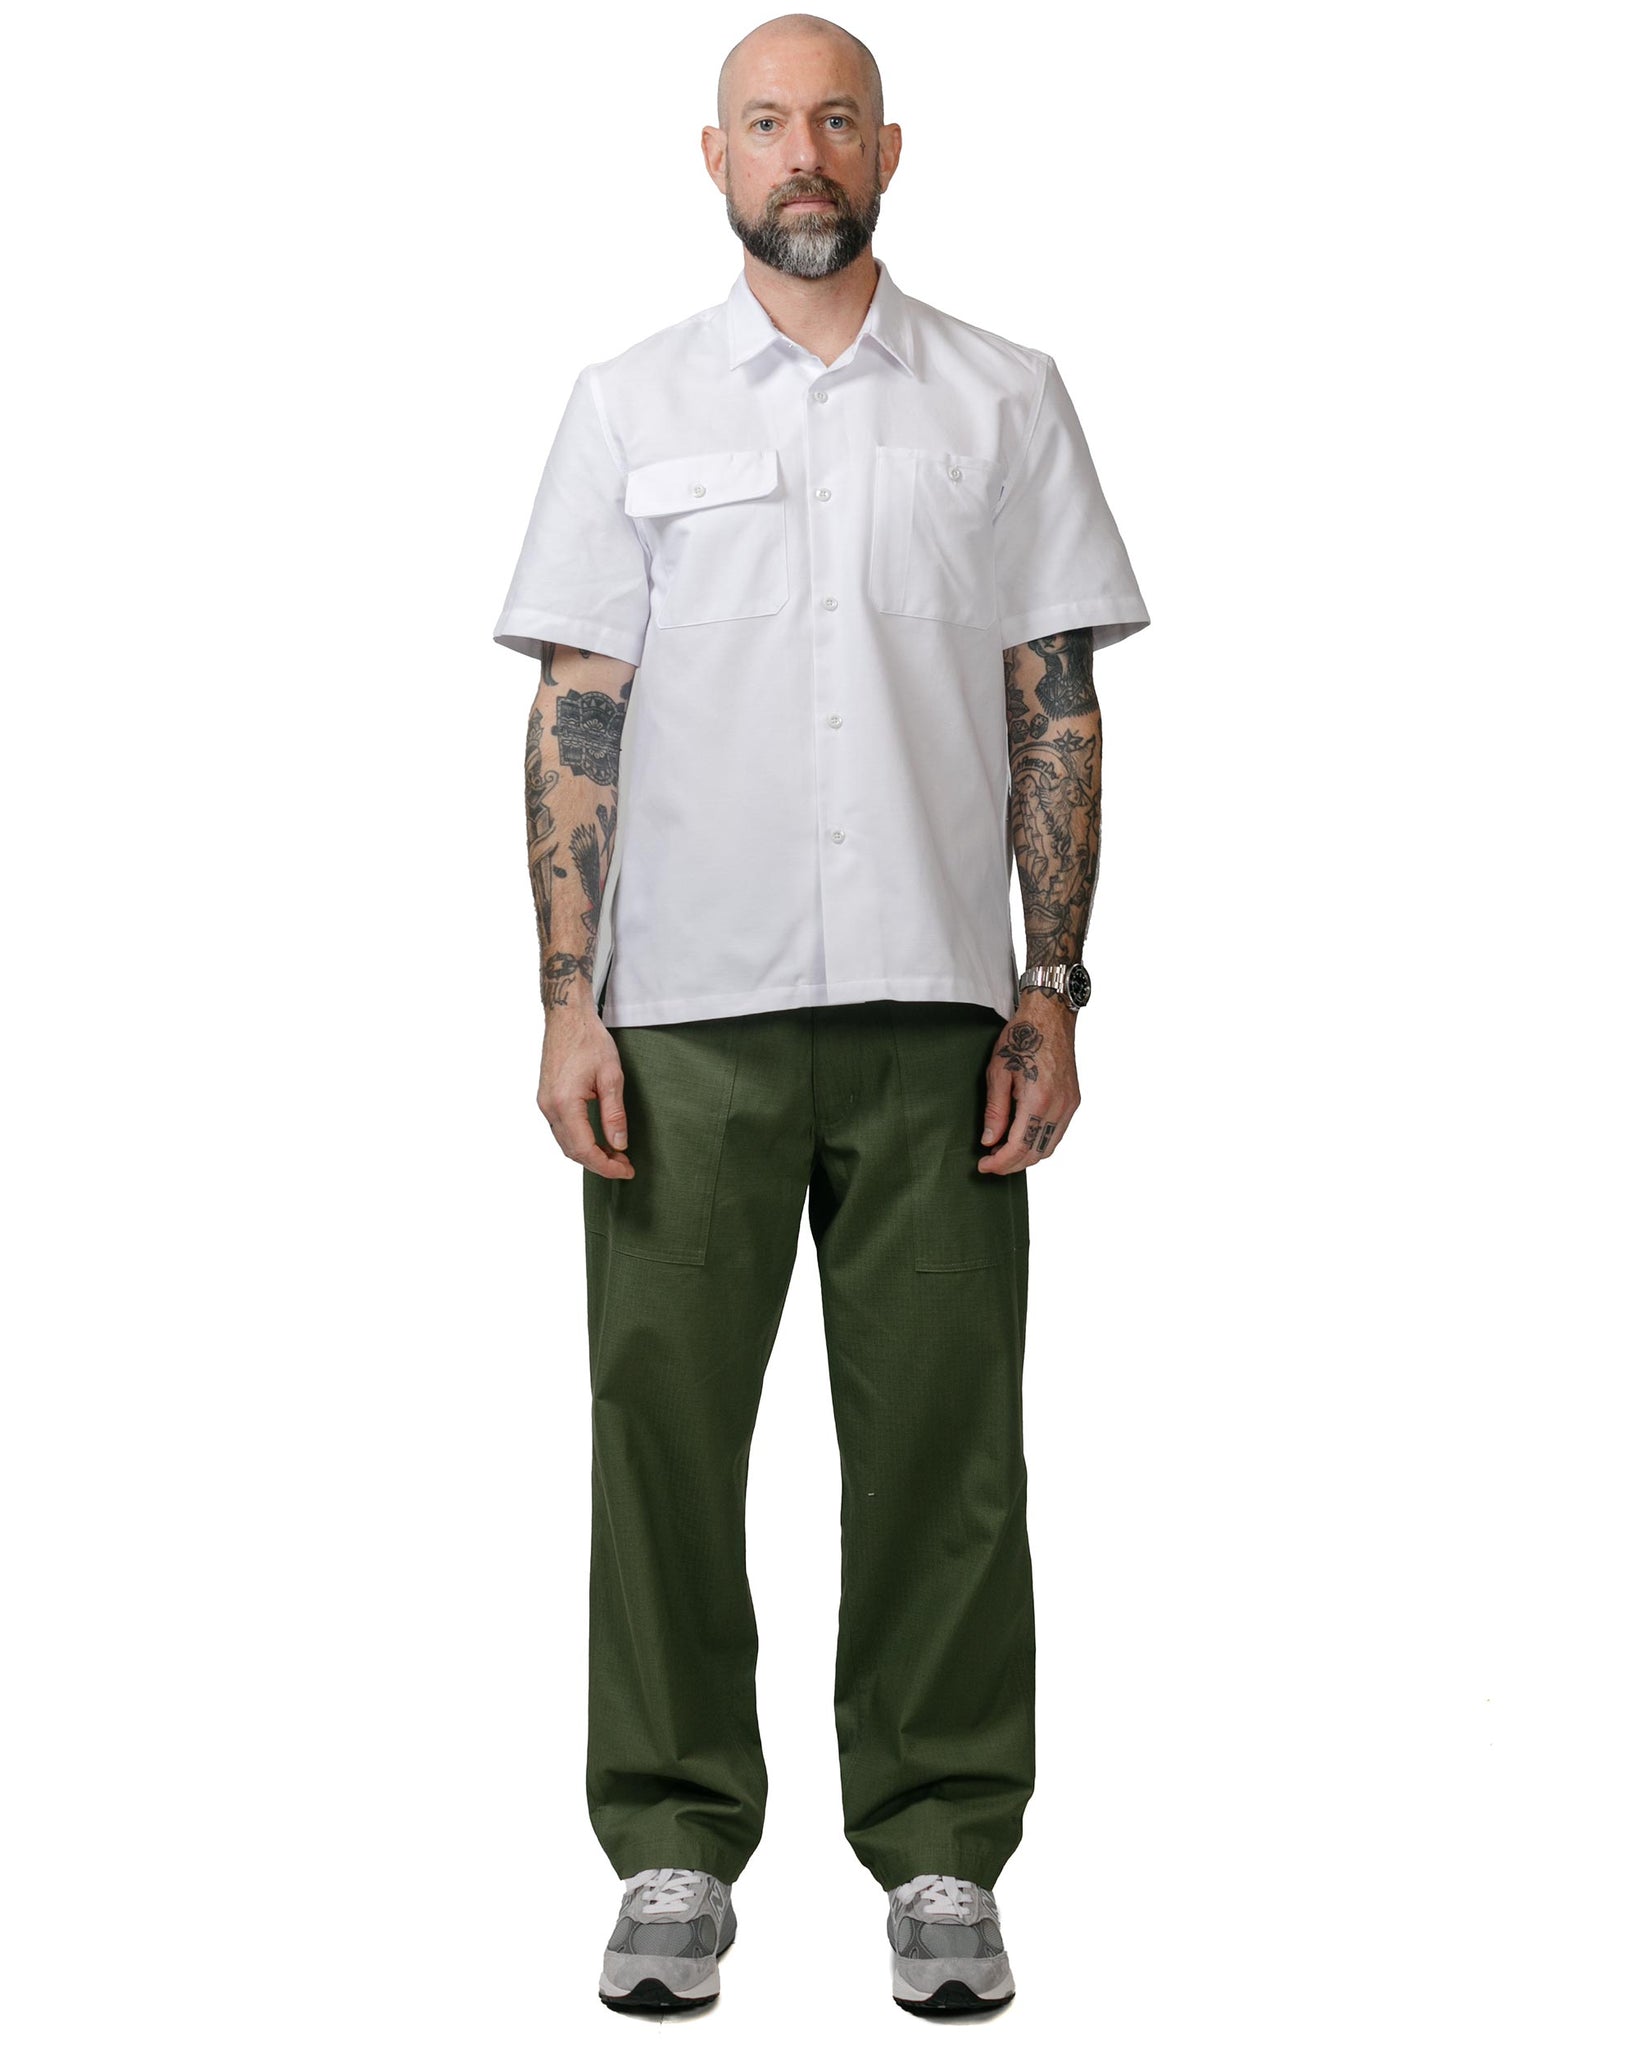 Randy's Garments Utility Pant Cotton Ripstop Olive model full